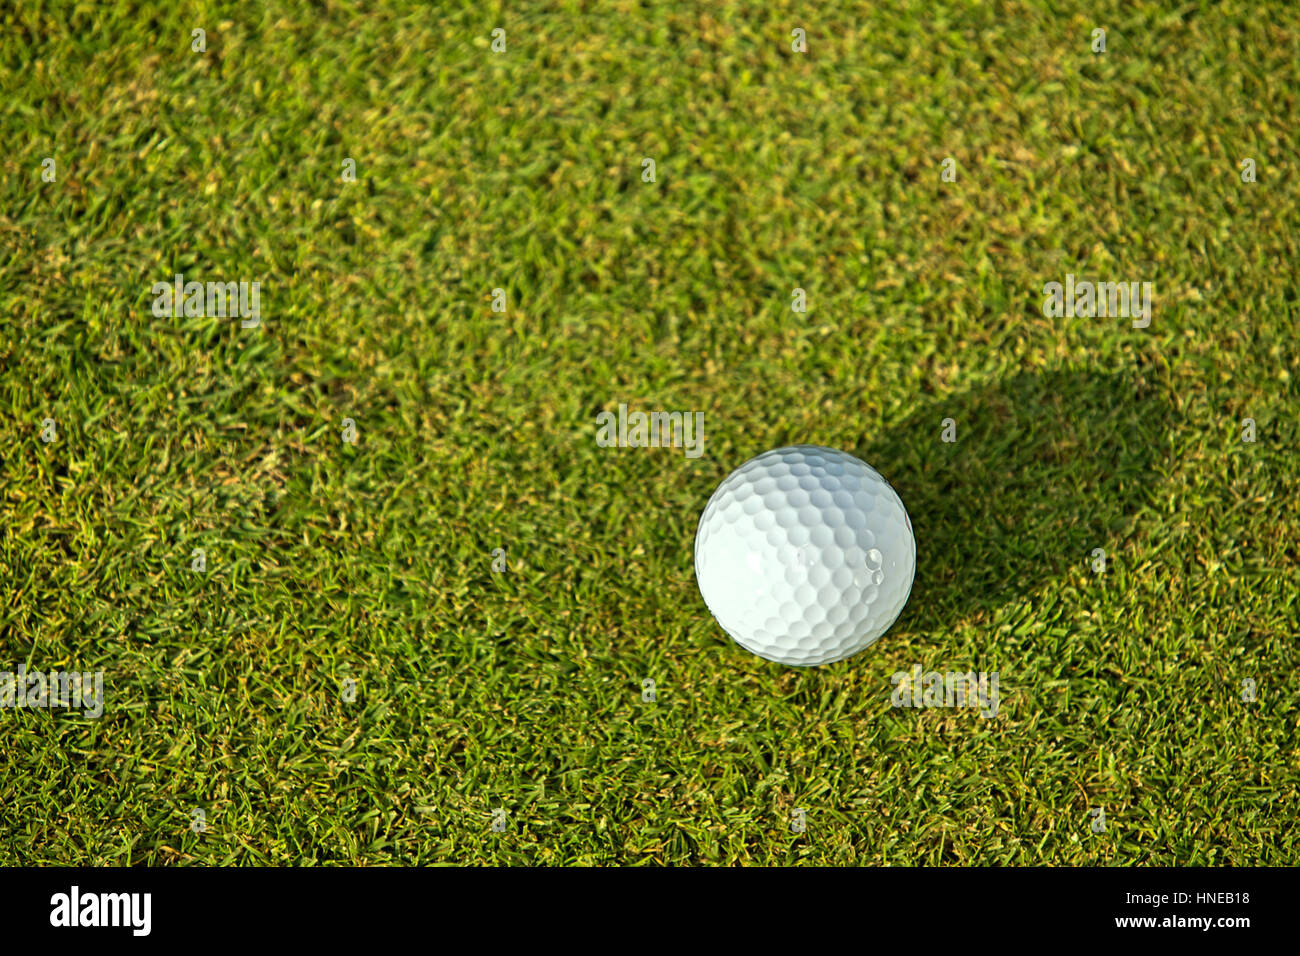 Elevated view of golf ball on grass Stock Photo